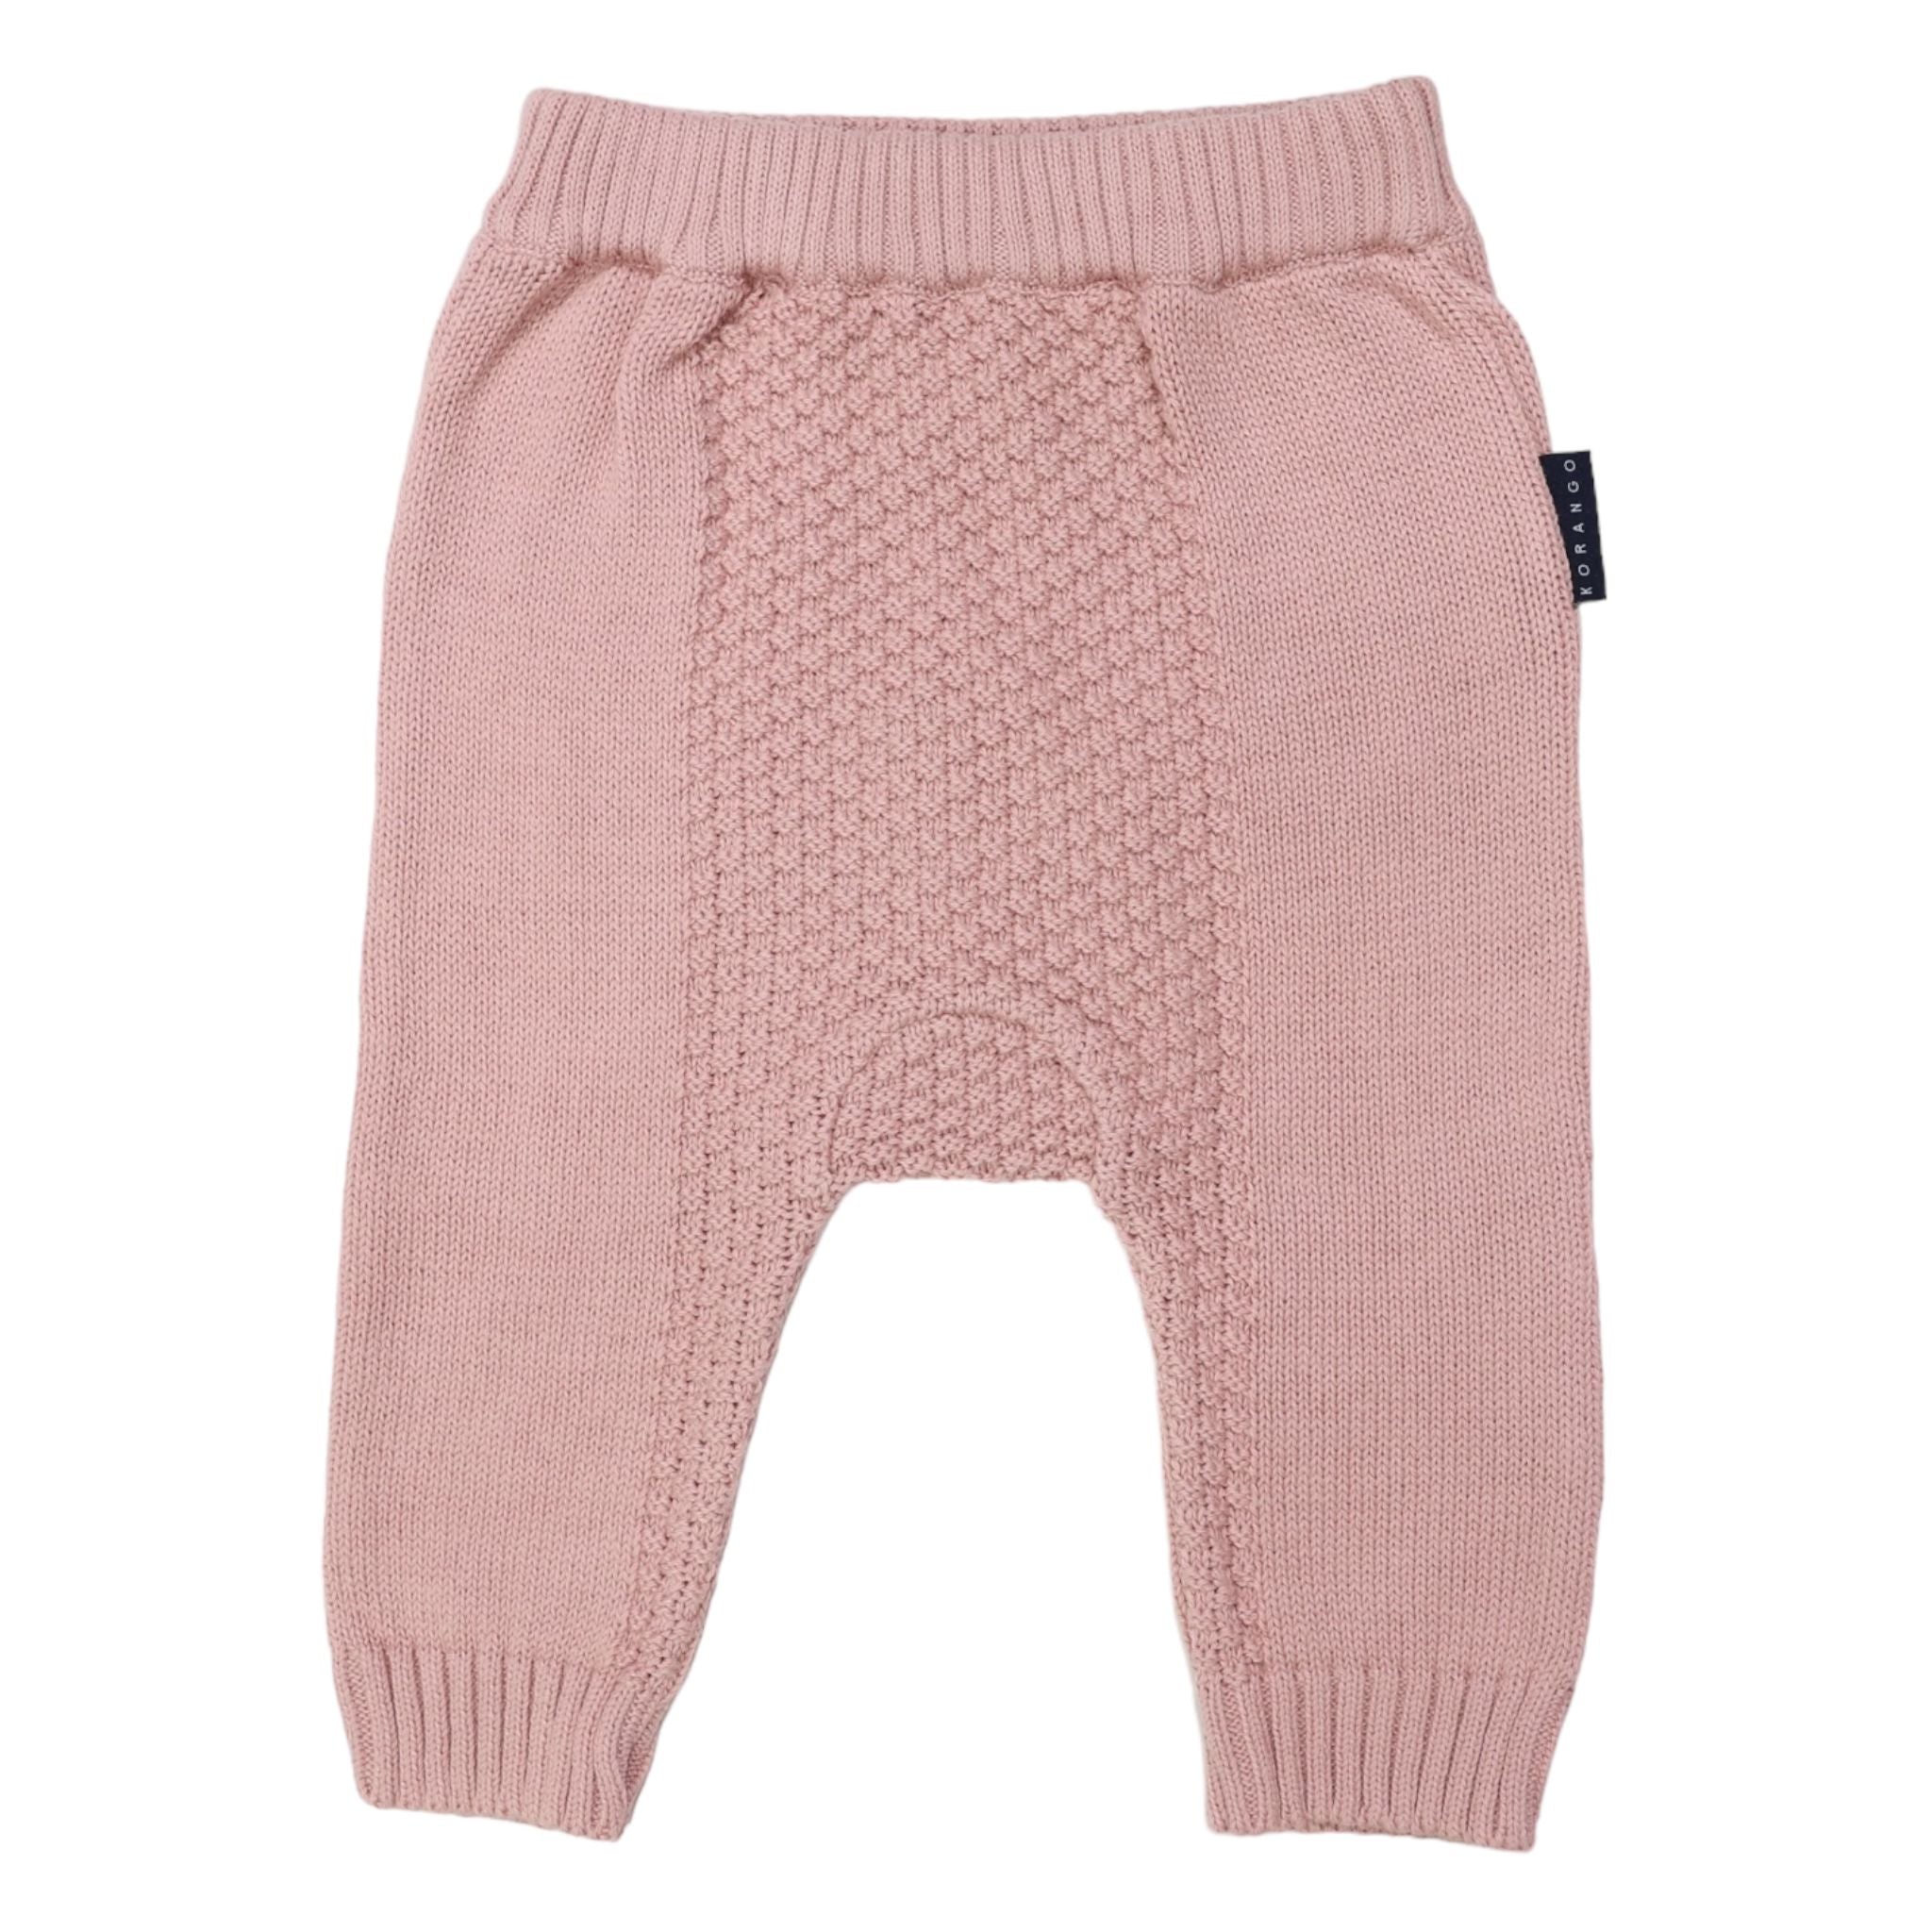 TEXTURED KNIT LEGGING - DUSTY PINK